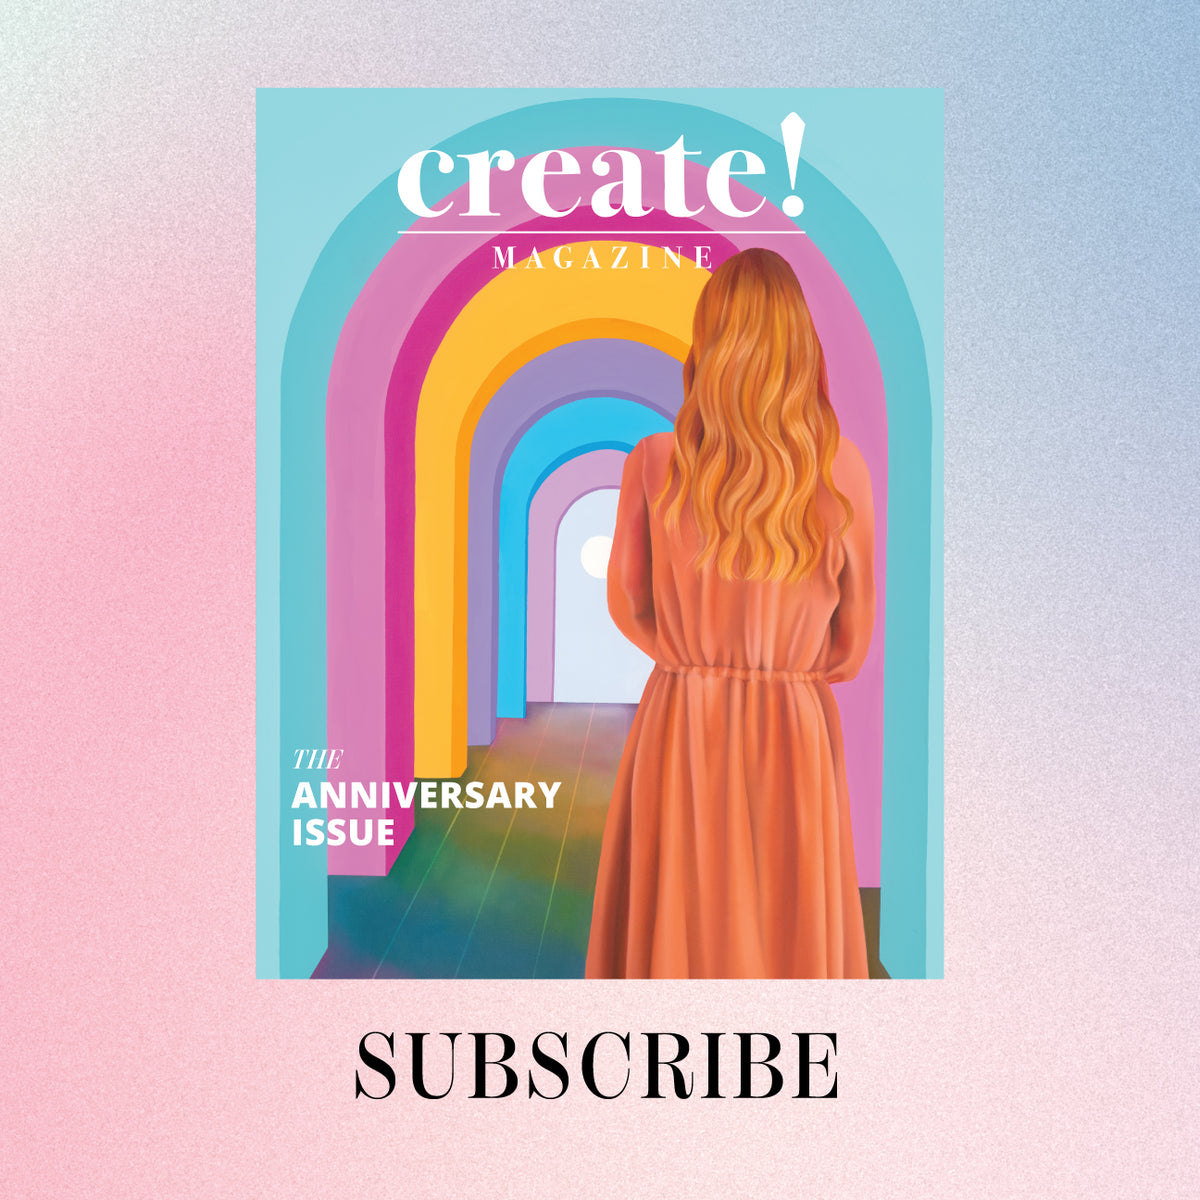 United States | Yearly Print Subscription (Starting issue #42) 4 Issues